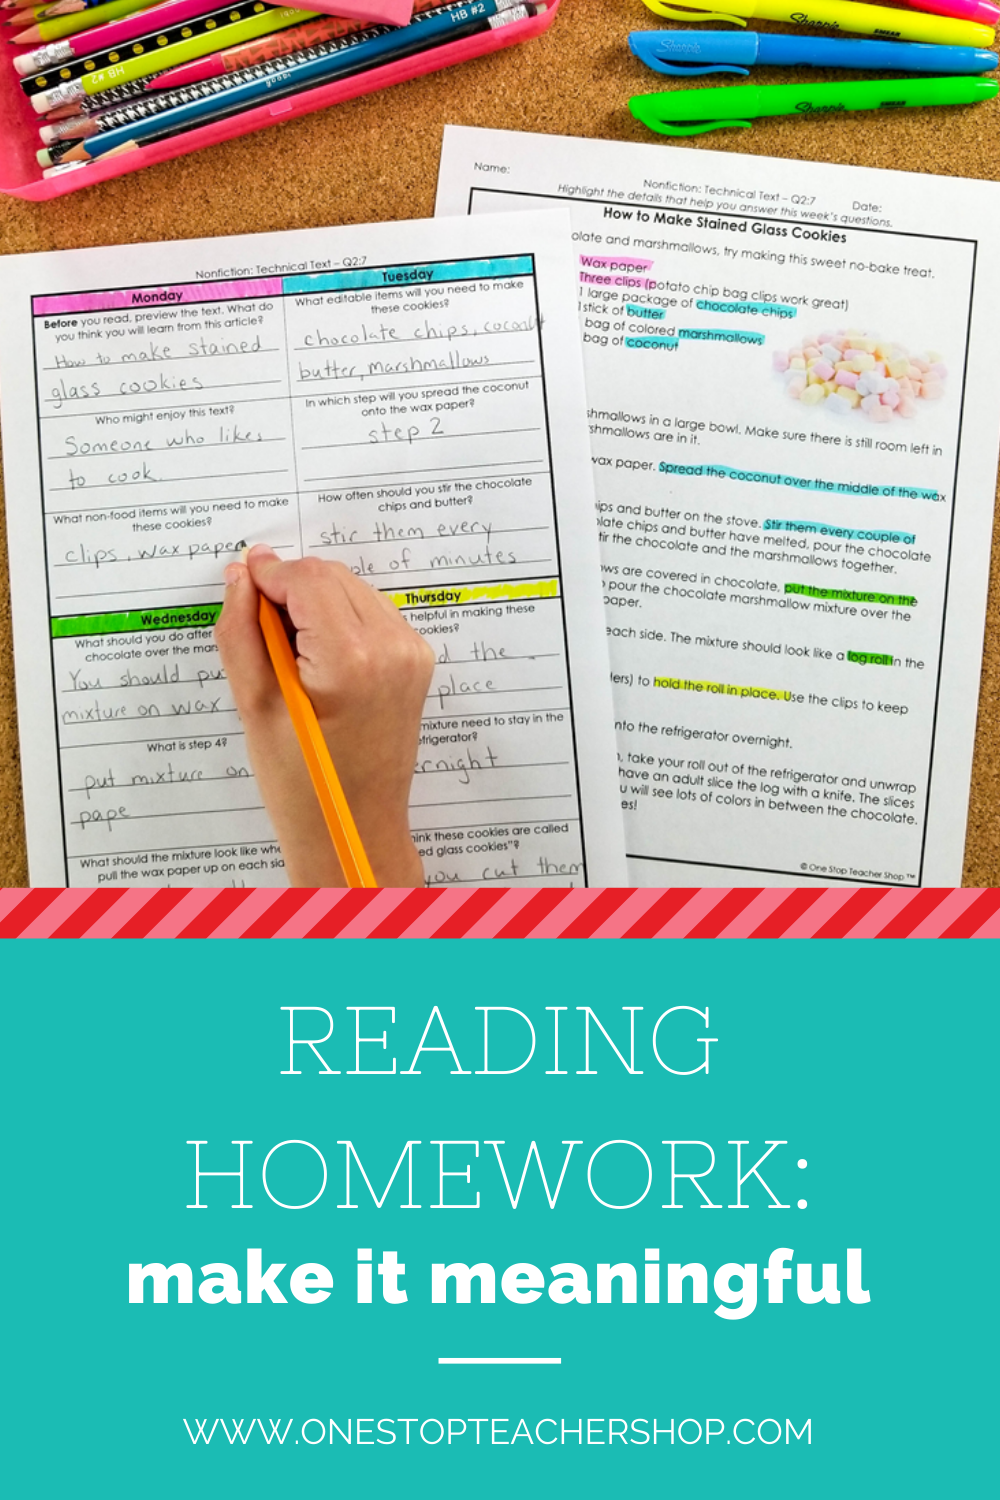 homework reading meaning